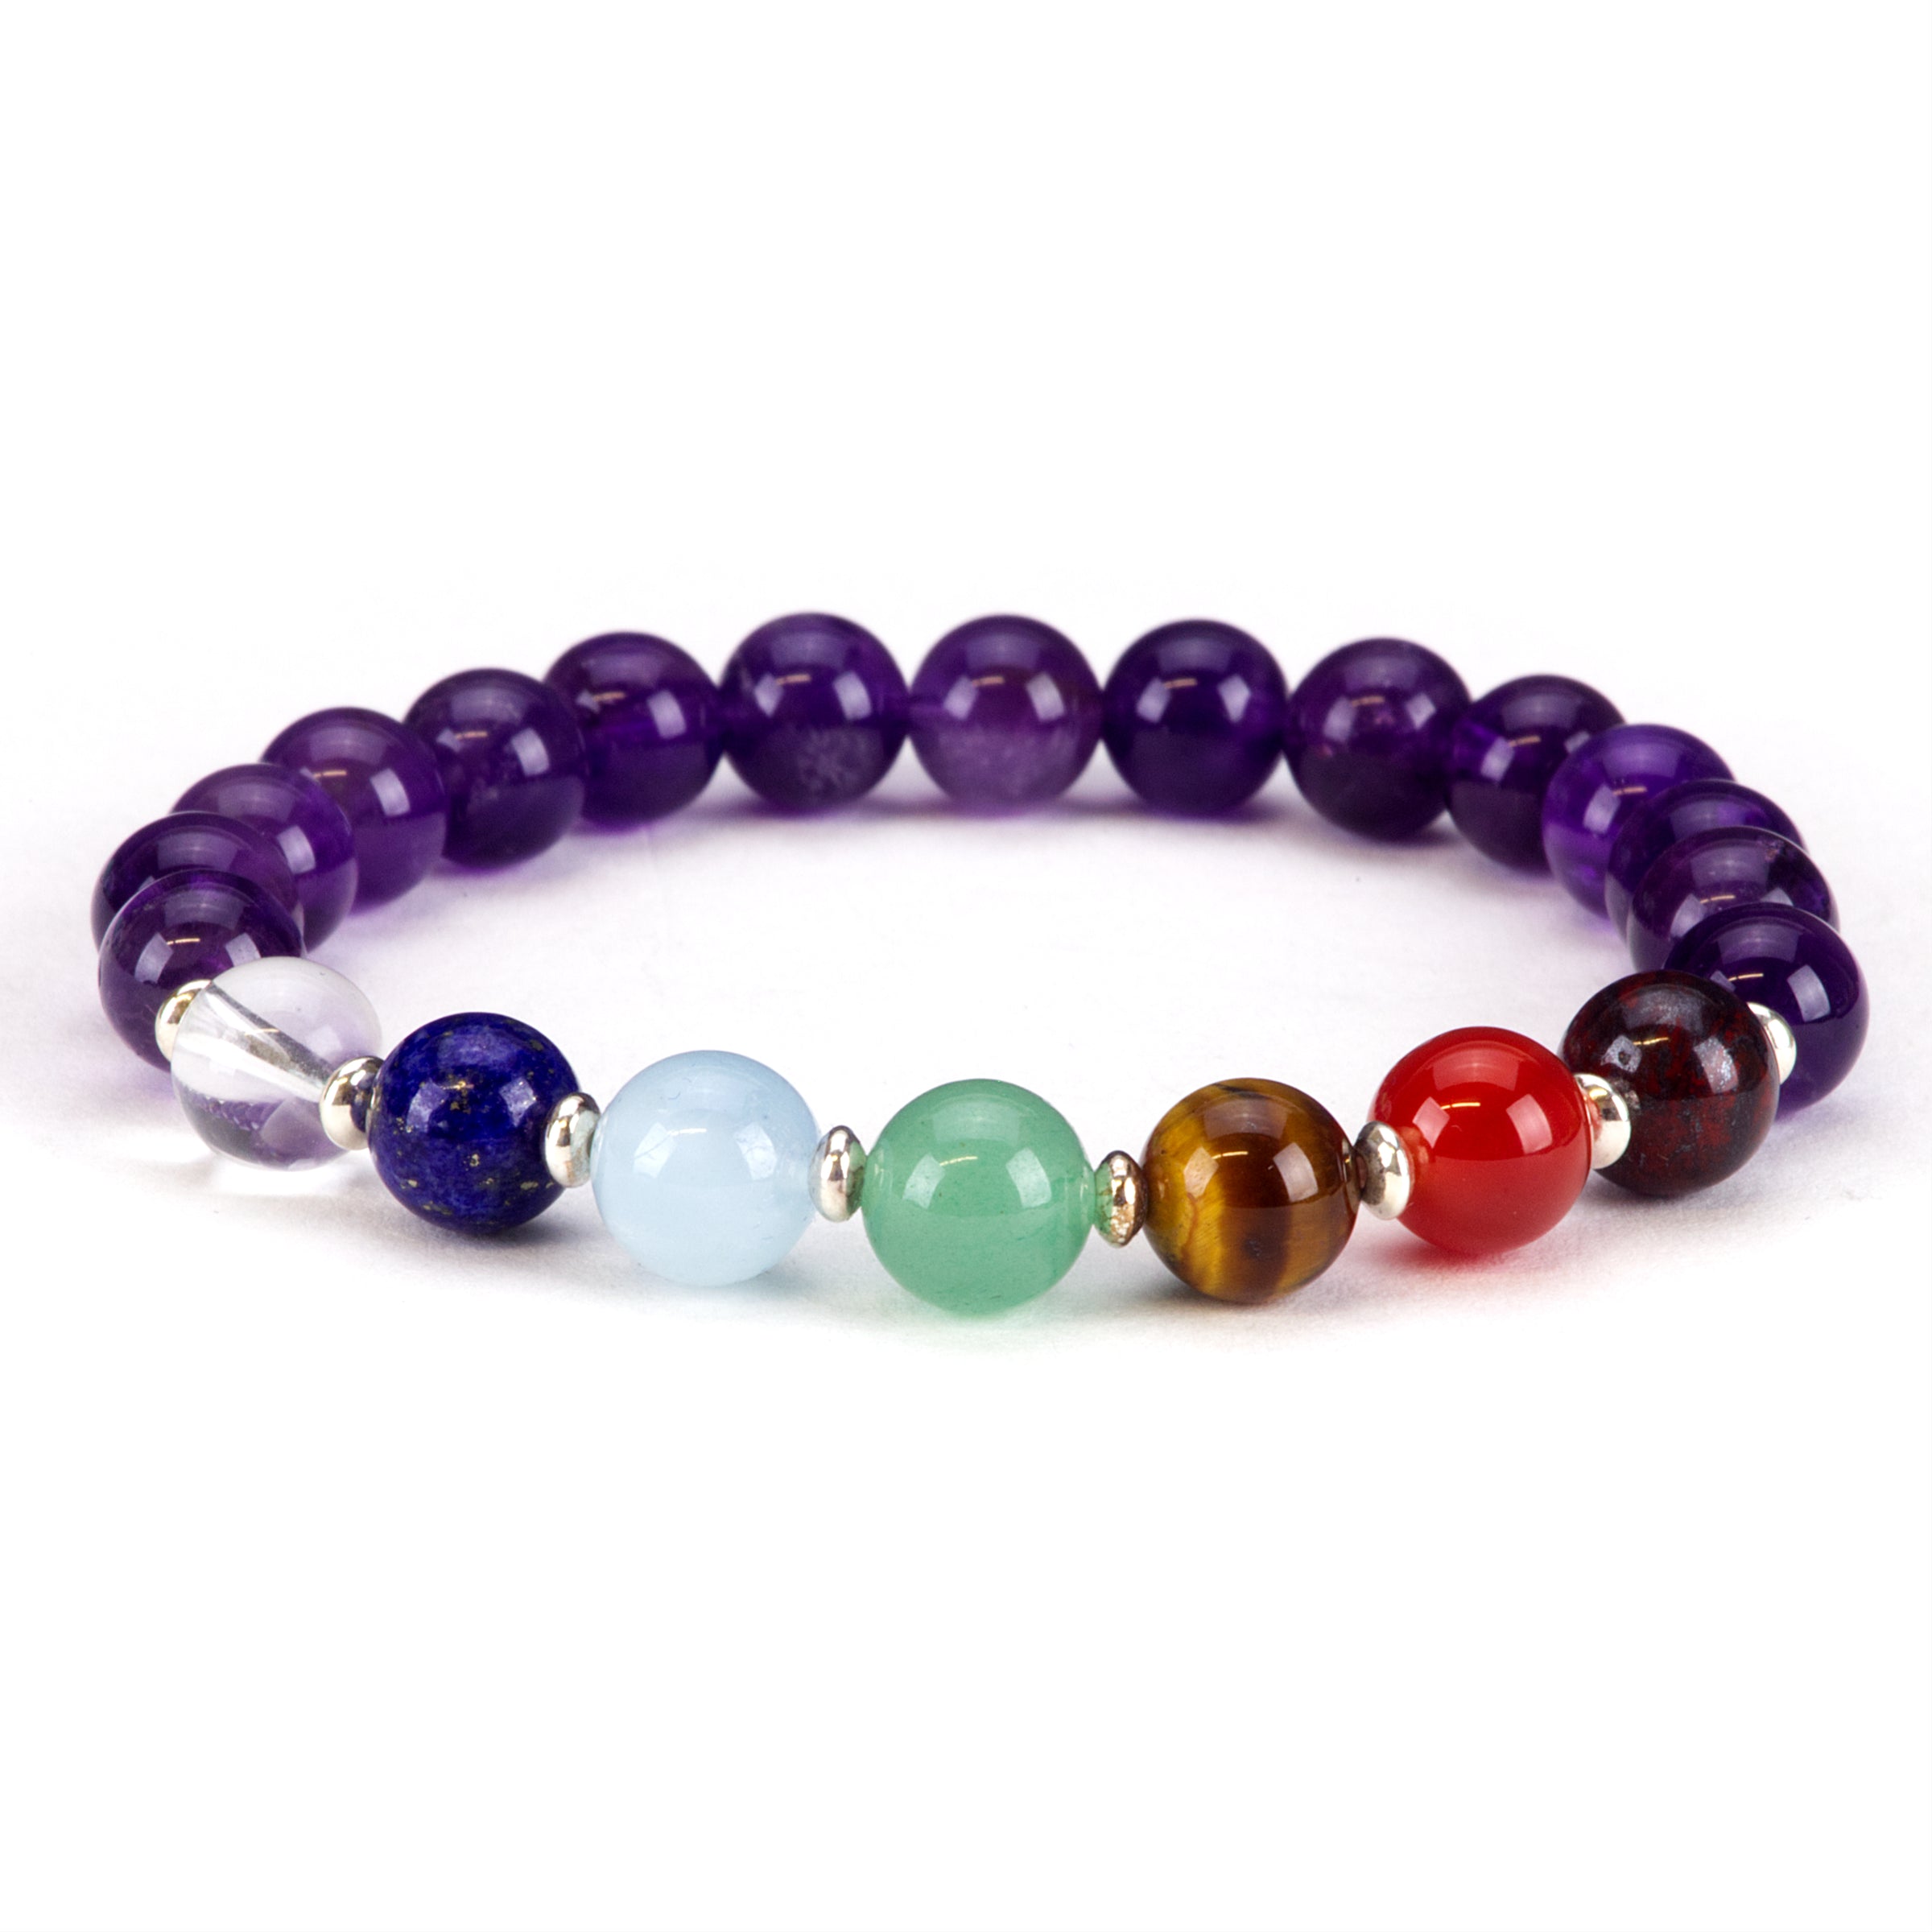 Chakra Stretch Bracelet | 8mm Beads with Sterling Silver Spacers (Amethyst) Medium